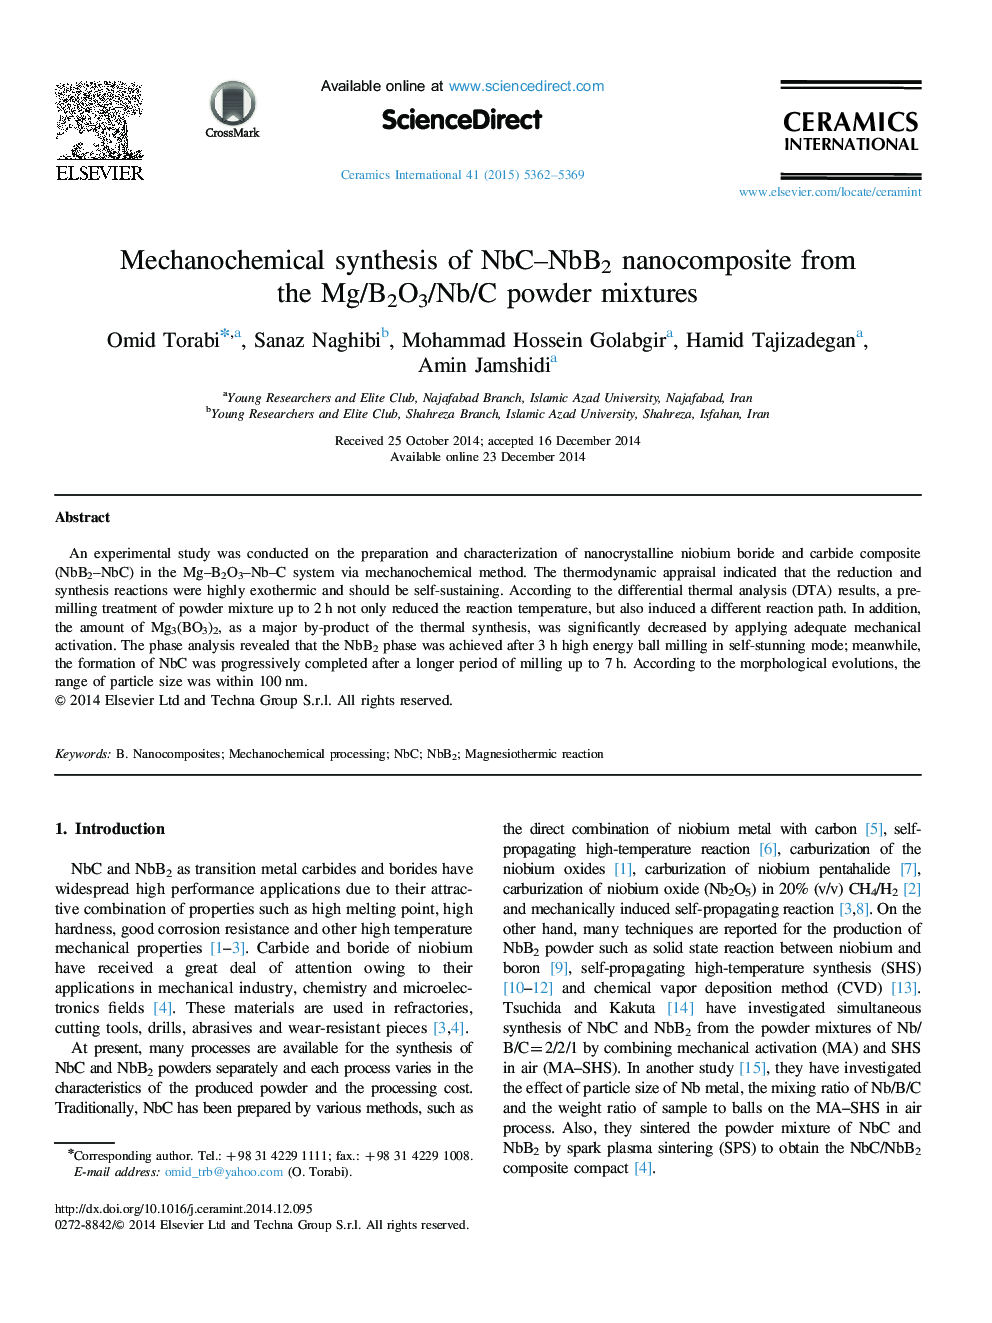 Mechanochemical synthesis of NbC–NbB2 nanocomposite from the Mg/B2O3/Nb/C powder mixtures